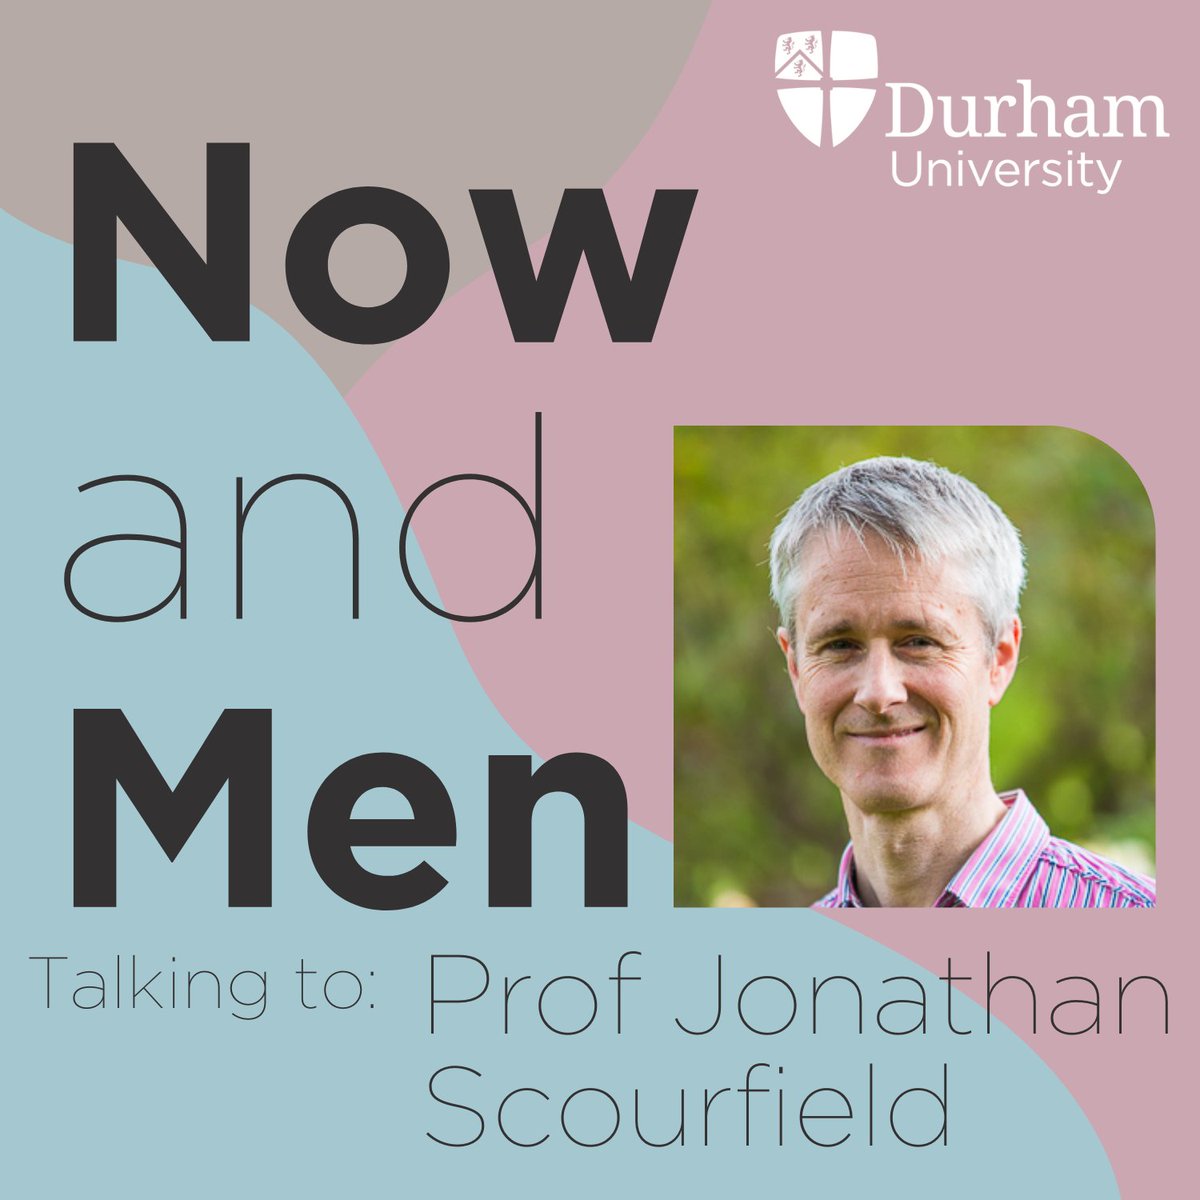 RT ARU_StepUp 'RT @the_daily_panda: We have a new episode of #NowandMen out today with the brilliant @j_scourfield, Prof of Social Work at @CUSocSci @CASCADEresearch. We talk to Jonathan about his research on male suicide & what it has to do with mas… '